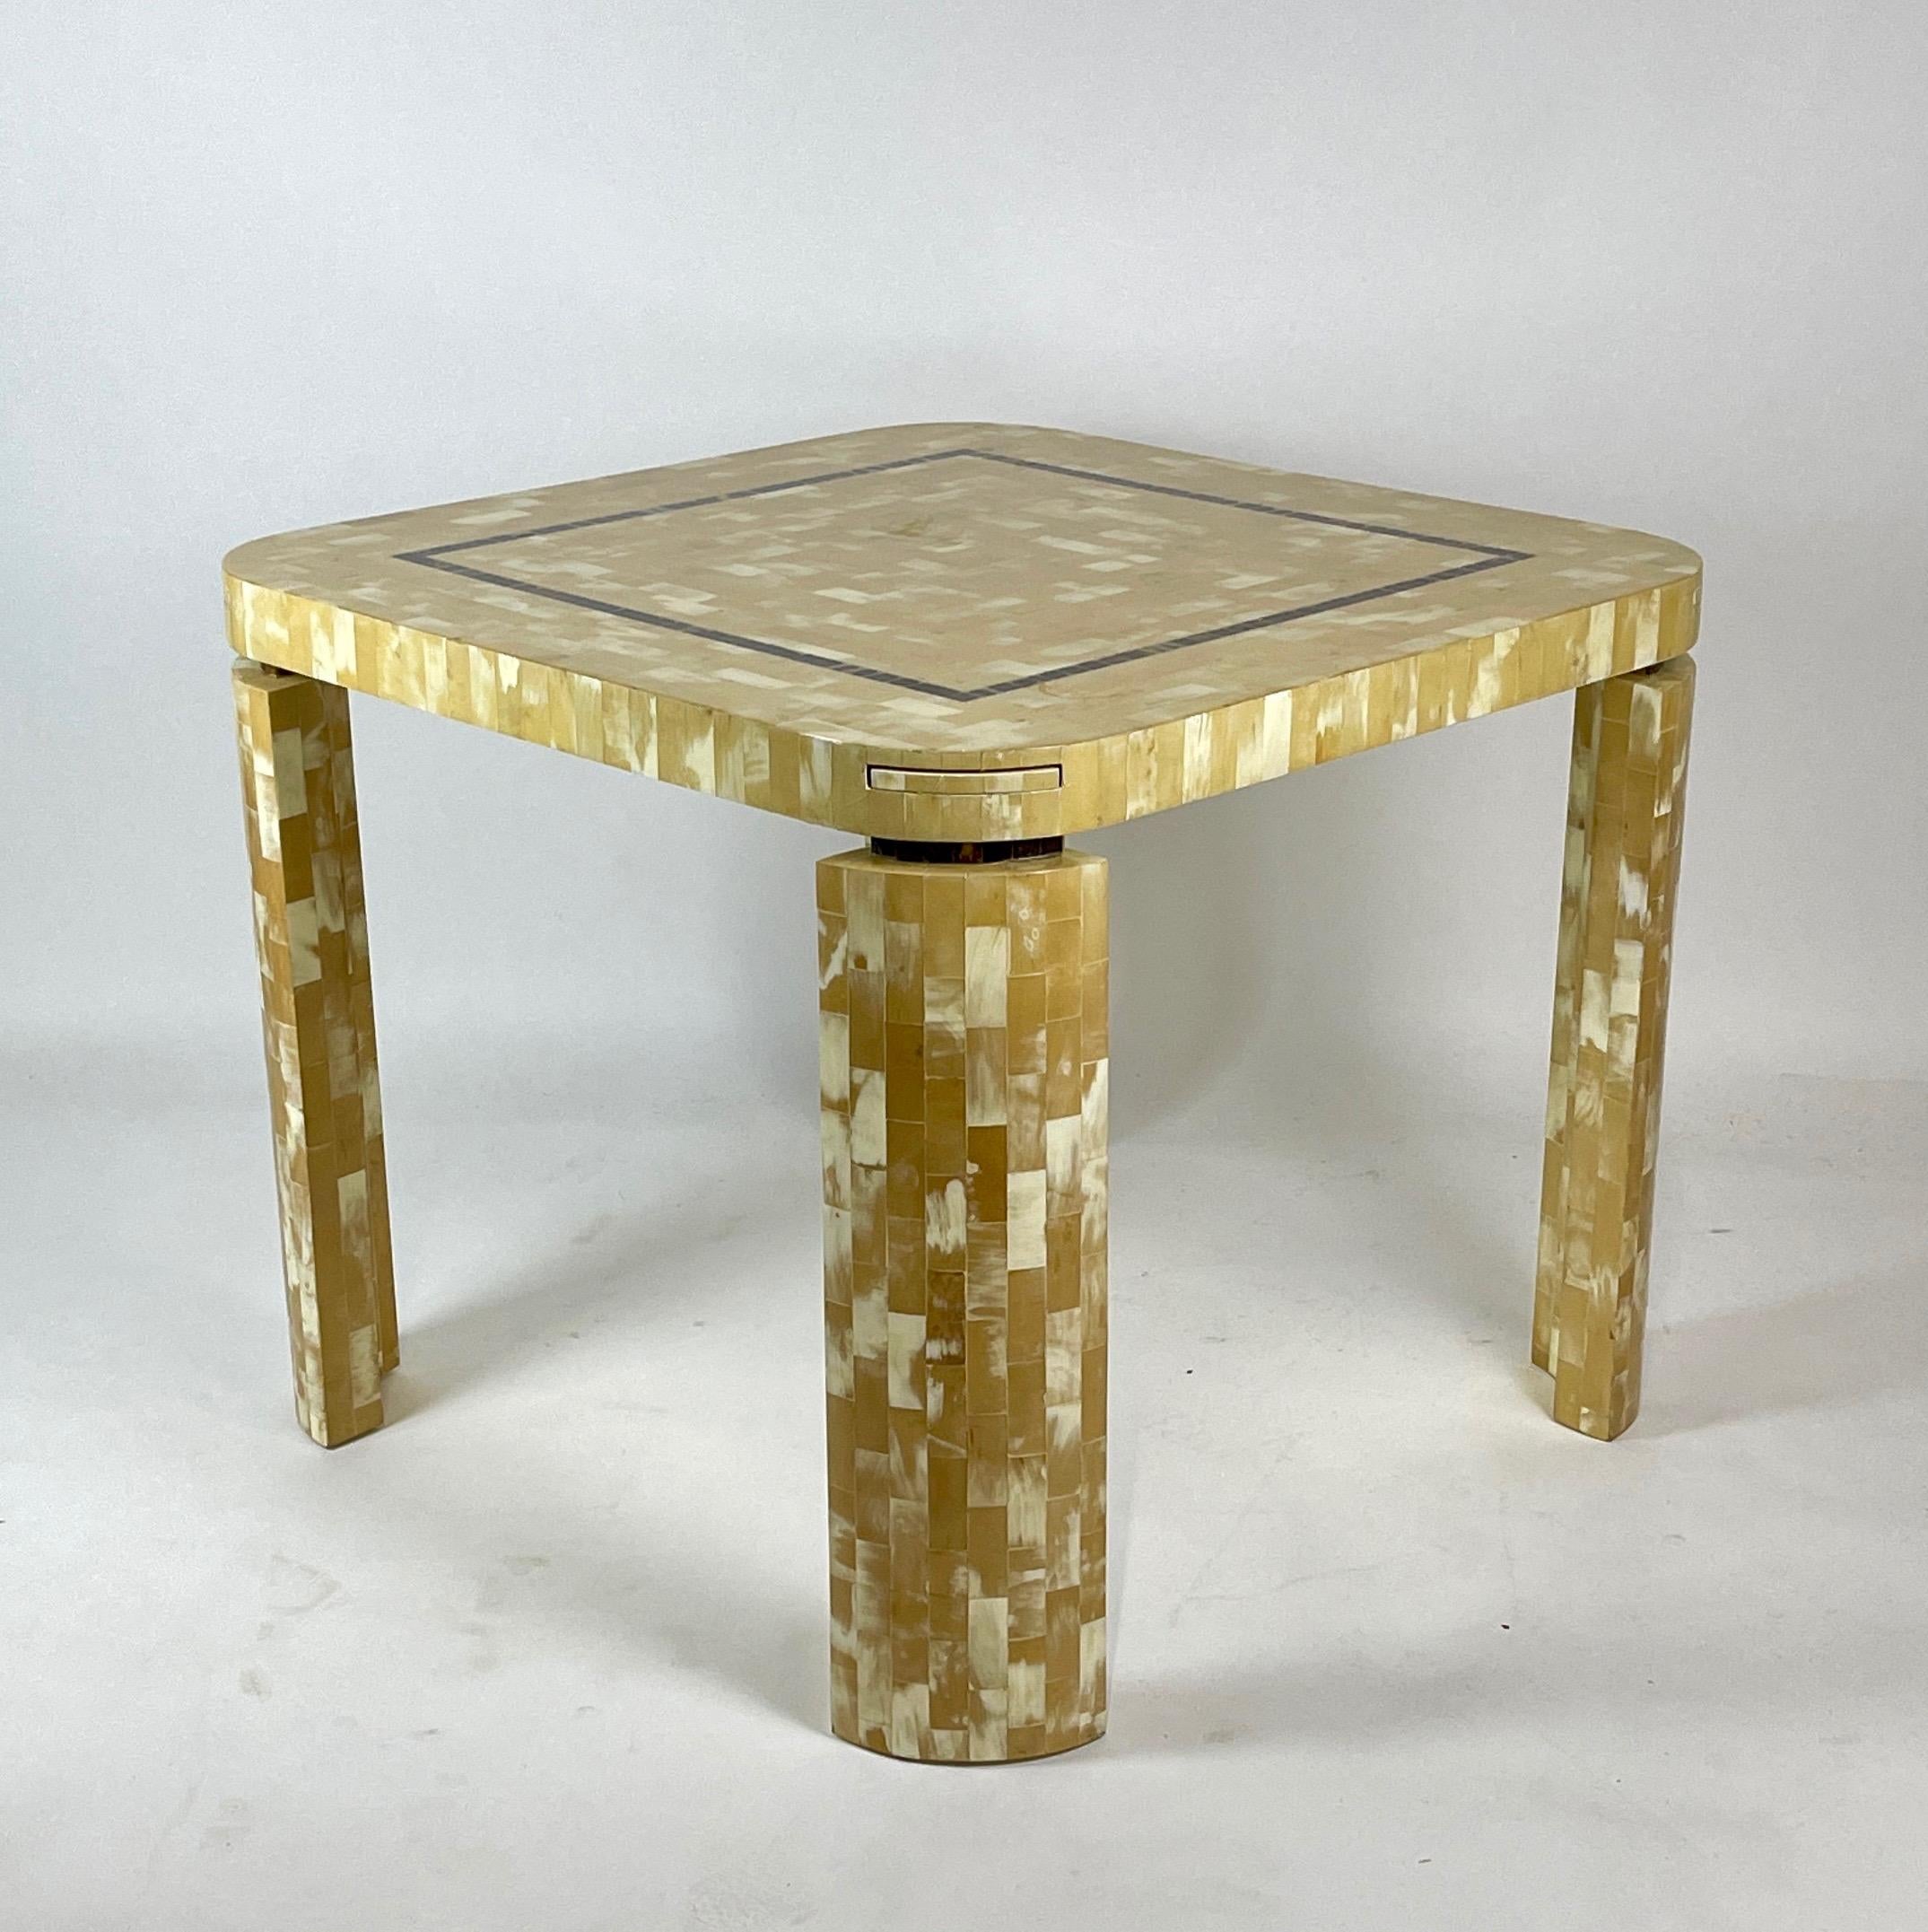 Tesselated Bone Square Game Table by Enrique Garcel Patchwork, Bogota, Columbia 1